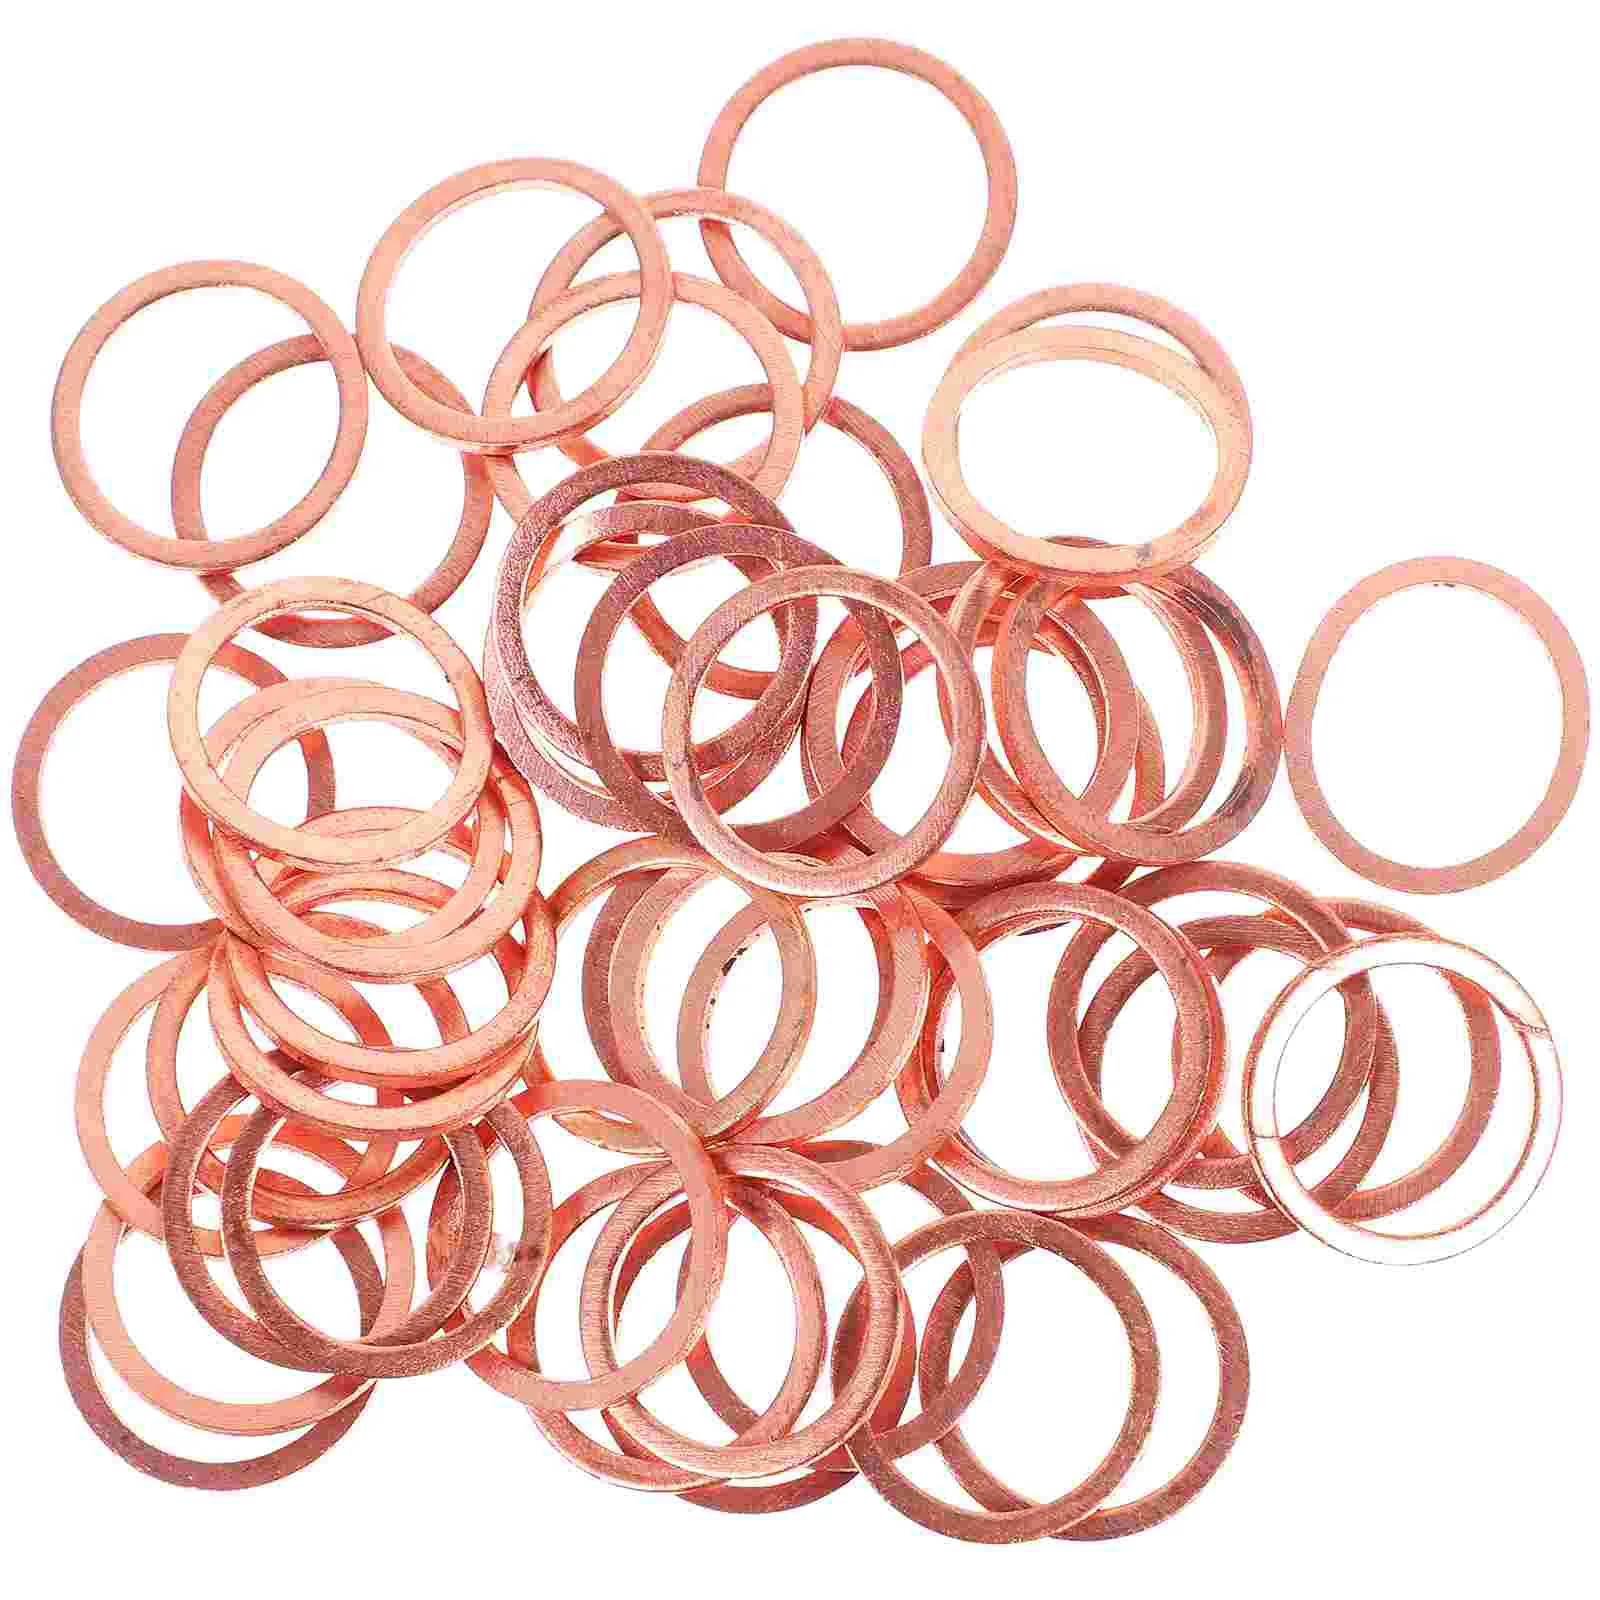 

50 Pcs Copper Gasket Oil Drain Plug Accessory Crush Washer Washers Metal Sealing Part Alloy